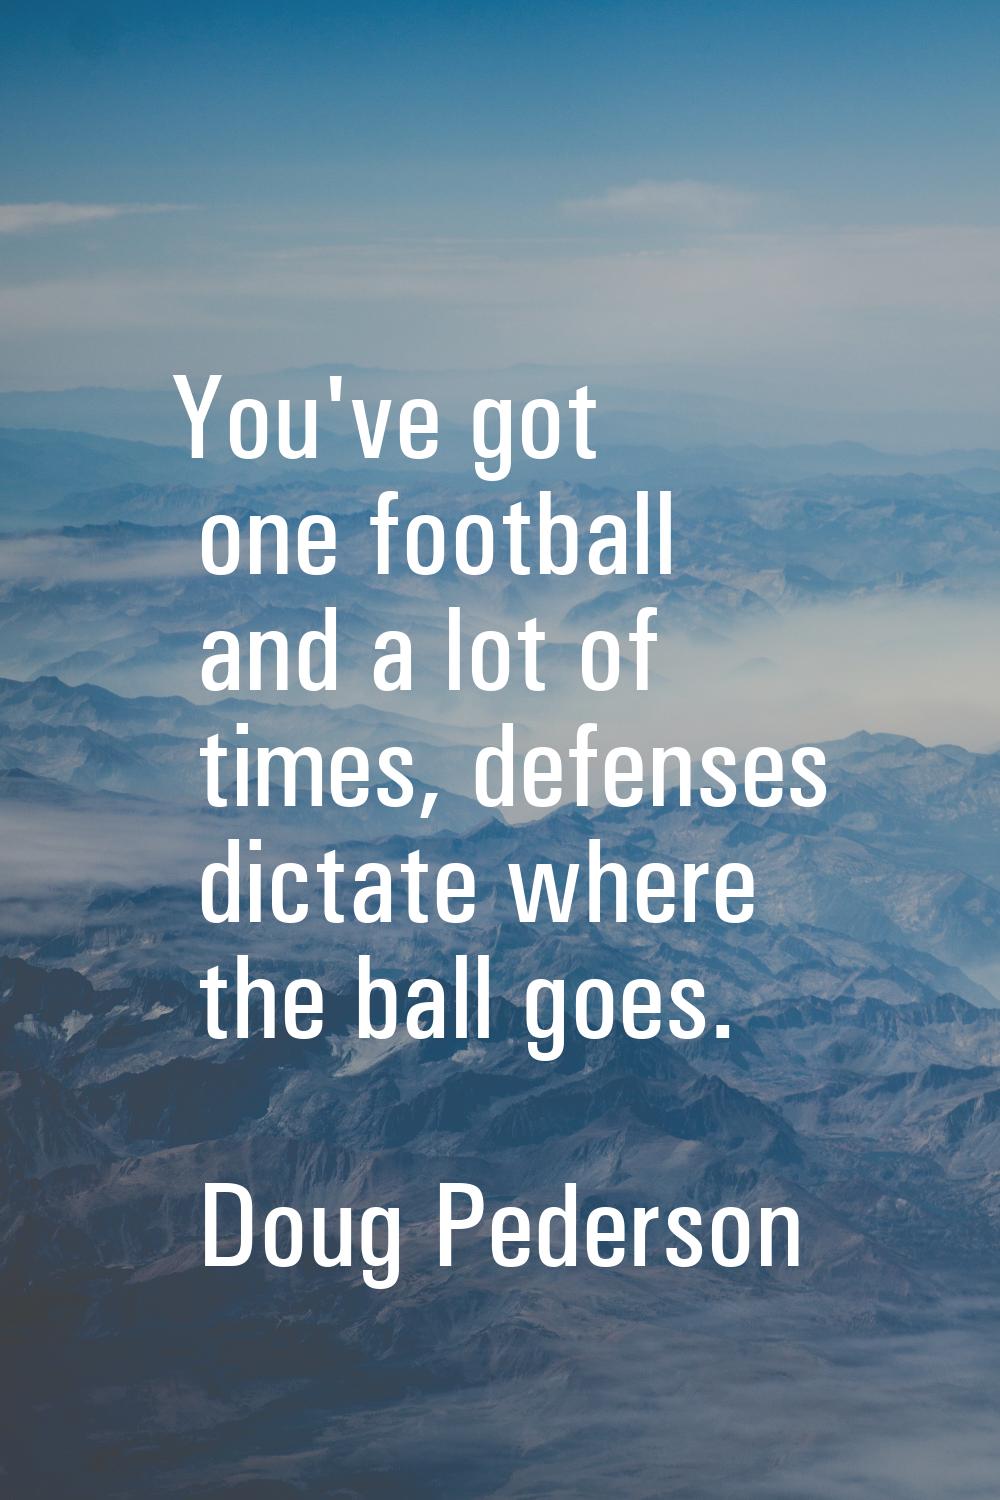 You've got one football and a lot of times, defenses dictate where the ball goes.